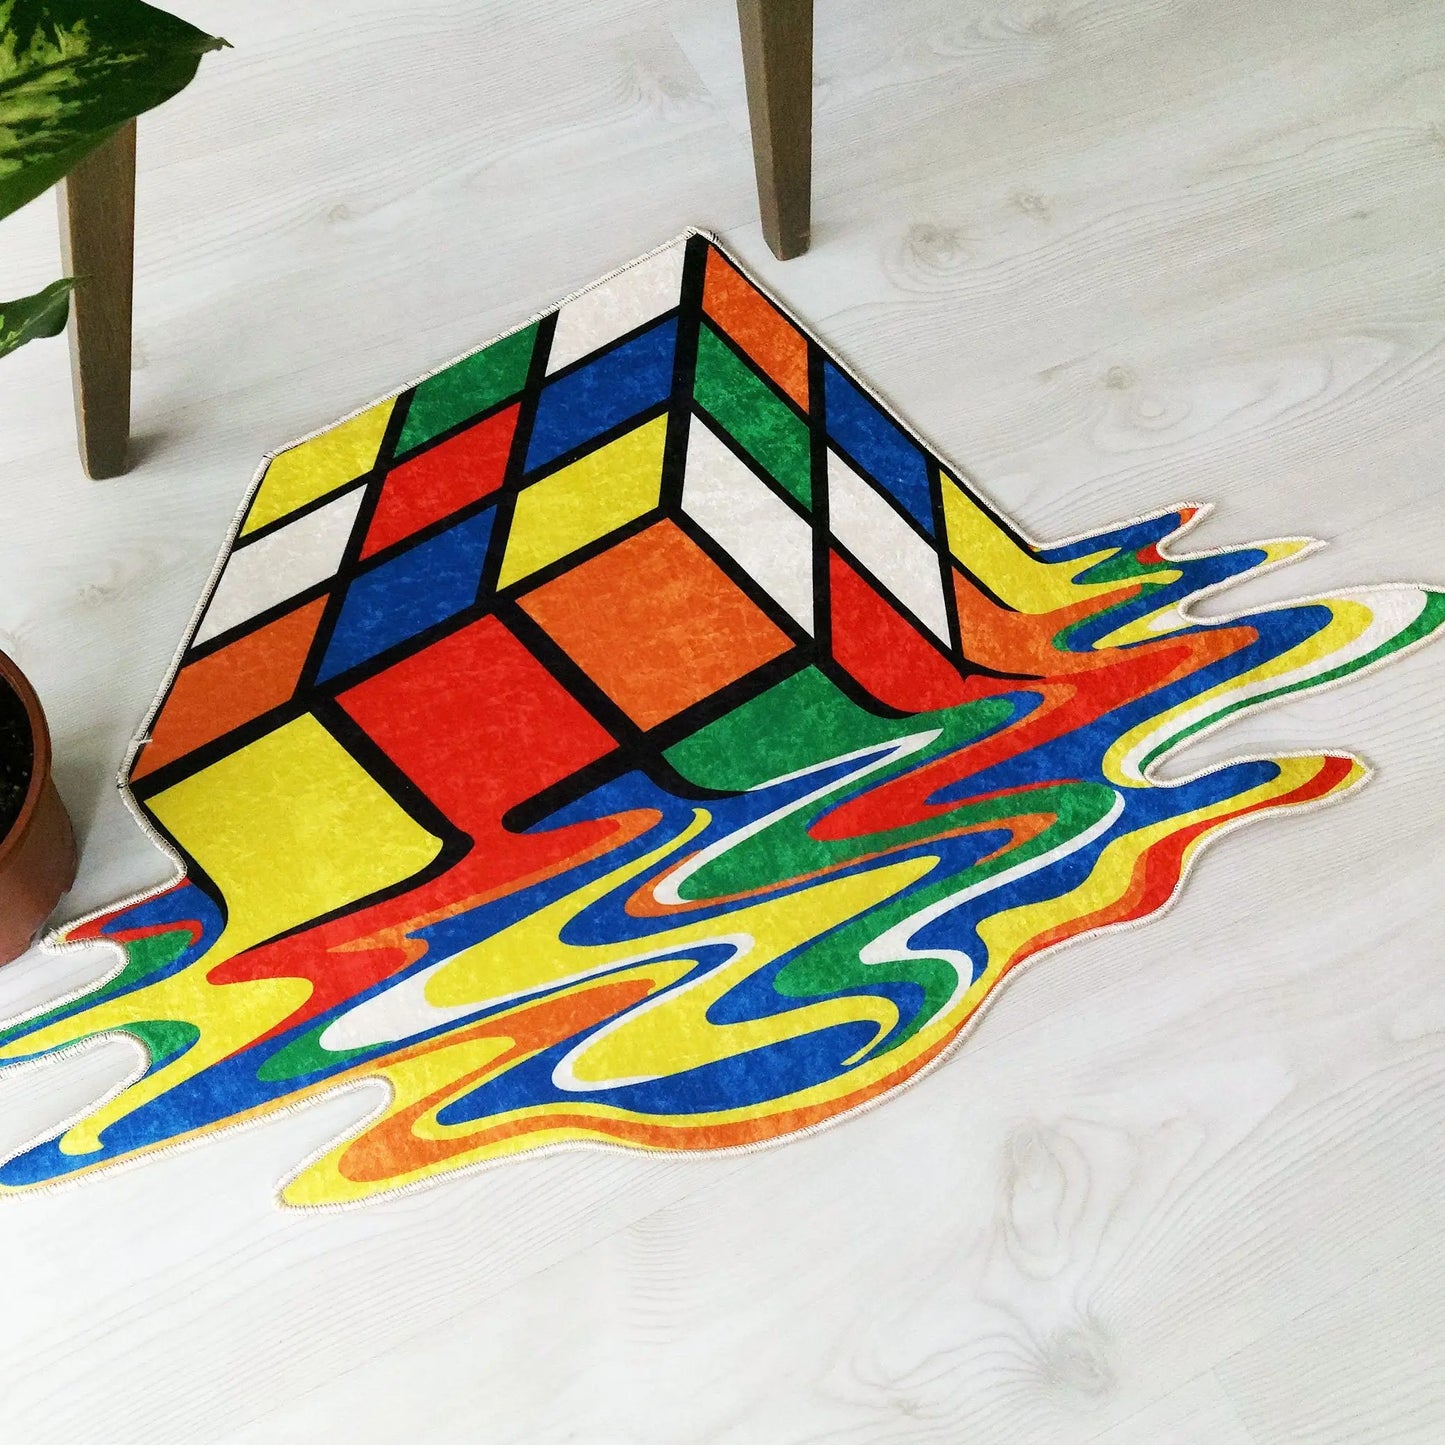 Melting Rubik’s Cube Rug Brainteaser Rug Perfect Home Office Decor Bright Colors Rug for Teenage Room Funny Doormat Movie Room